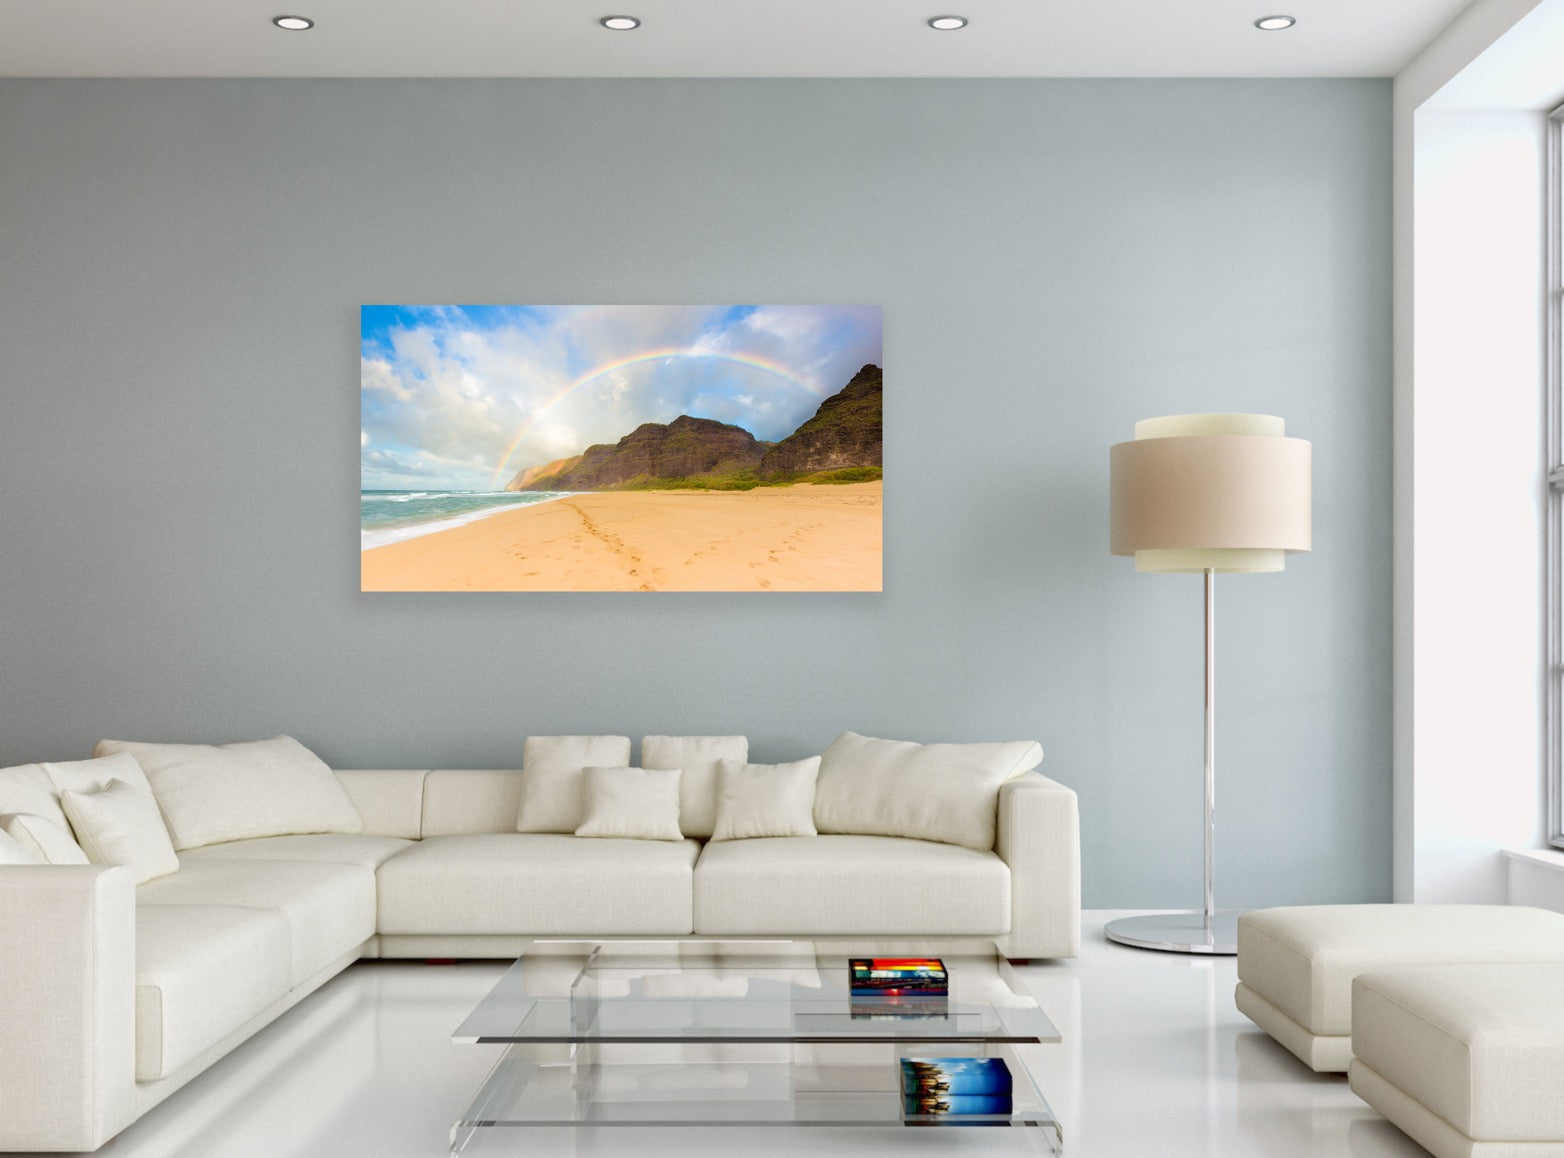 Wall demo of Napali Rainbow, a fine art photograph by landscape photographers Inspiring Images Hawaii.